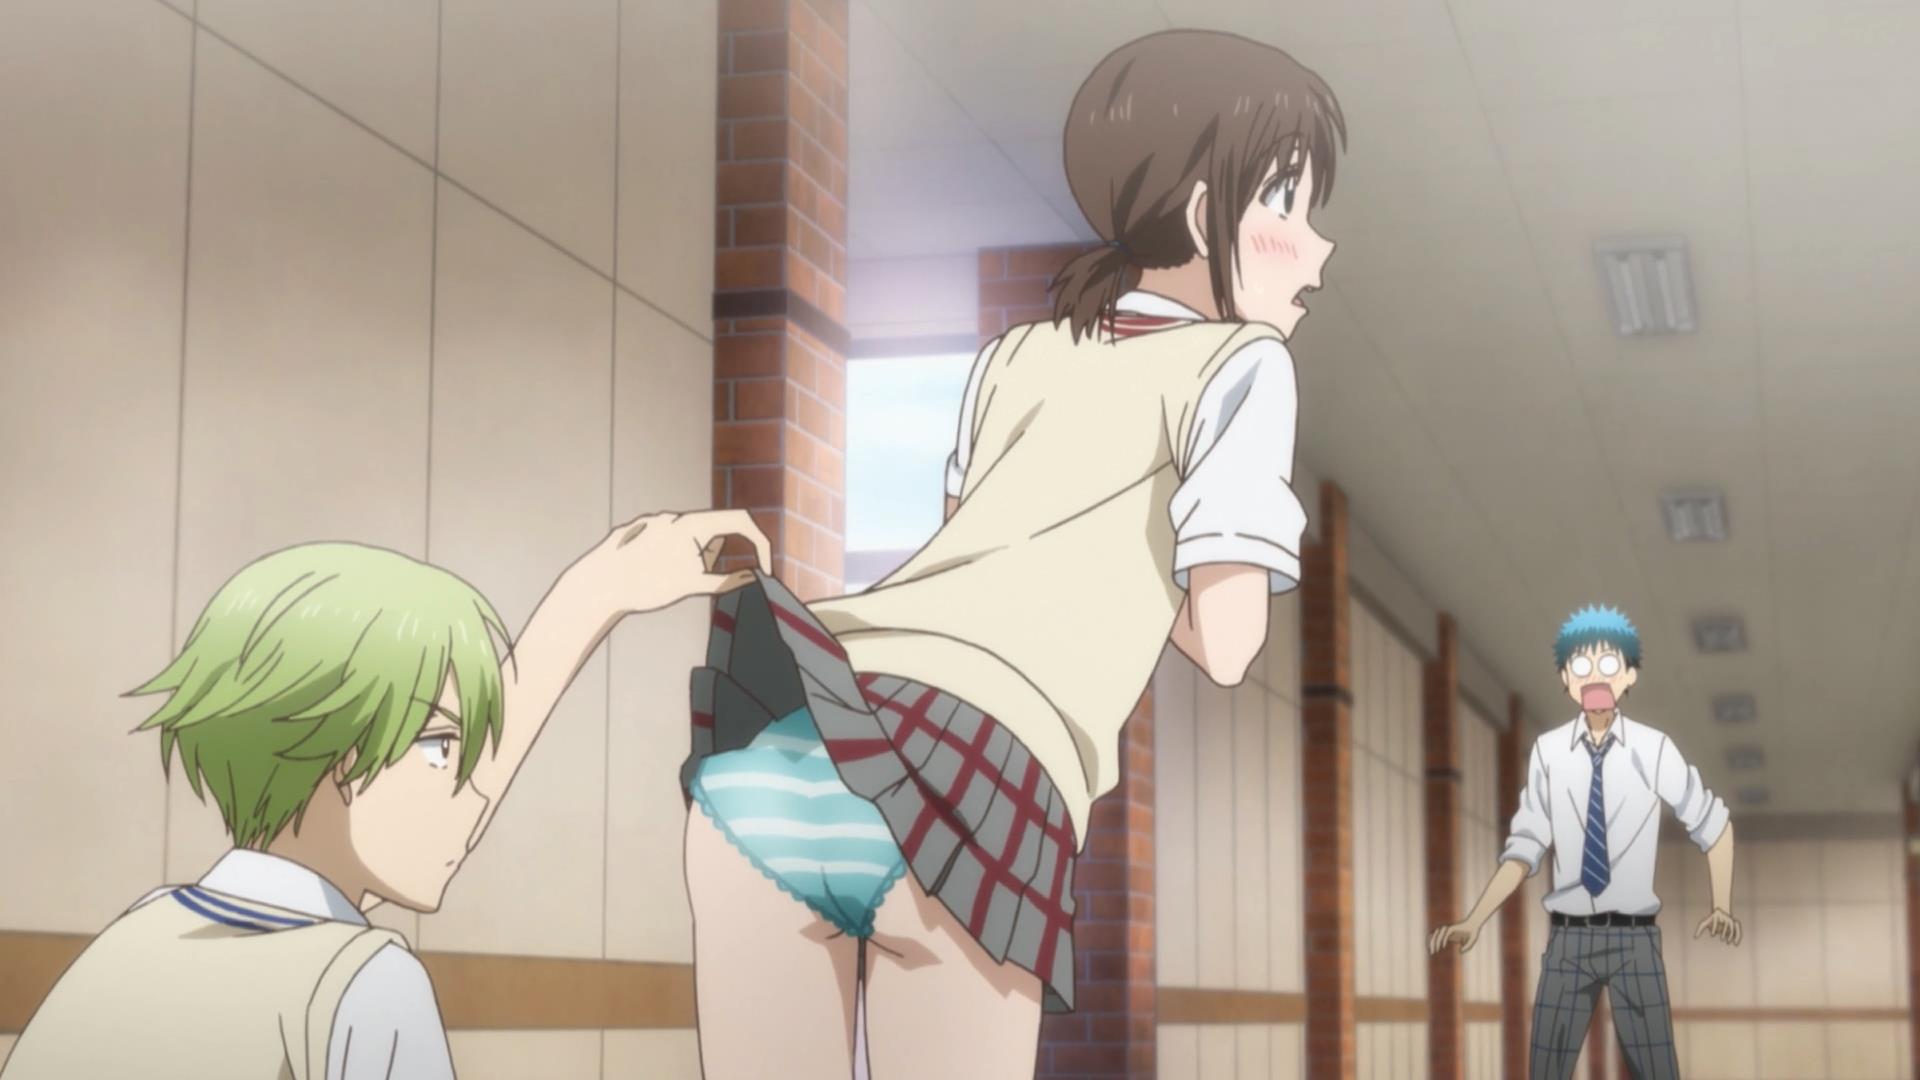 [HorribleSubs] Yamada-kun and the Seven Witches - 09 [1080p].mkv_snapshot_05.50_[2015.06.07_13.58.21]